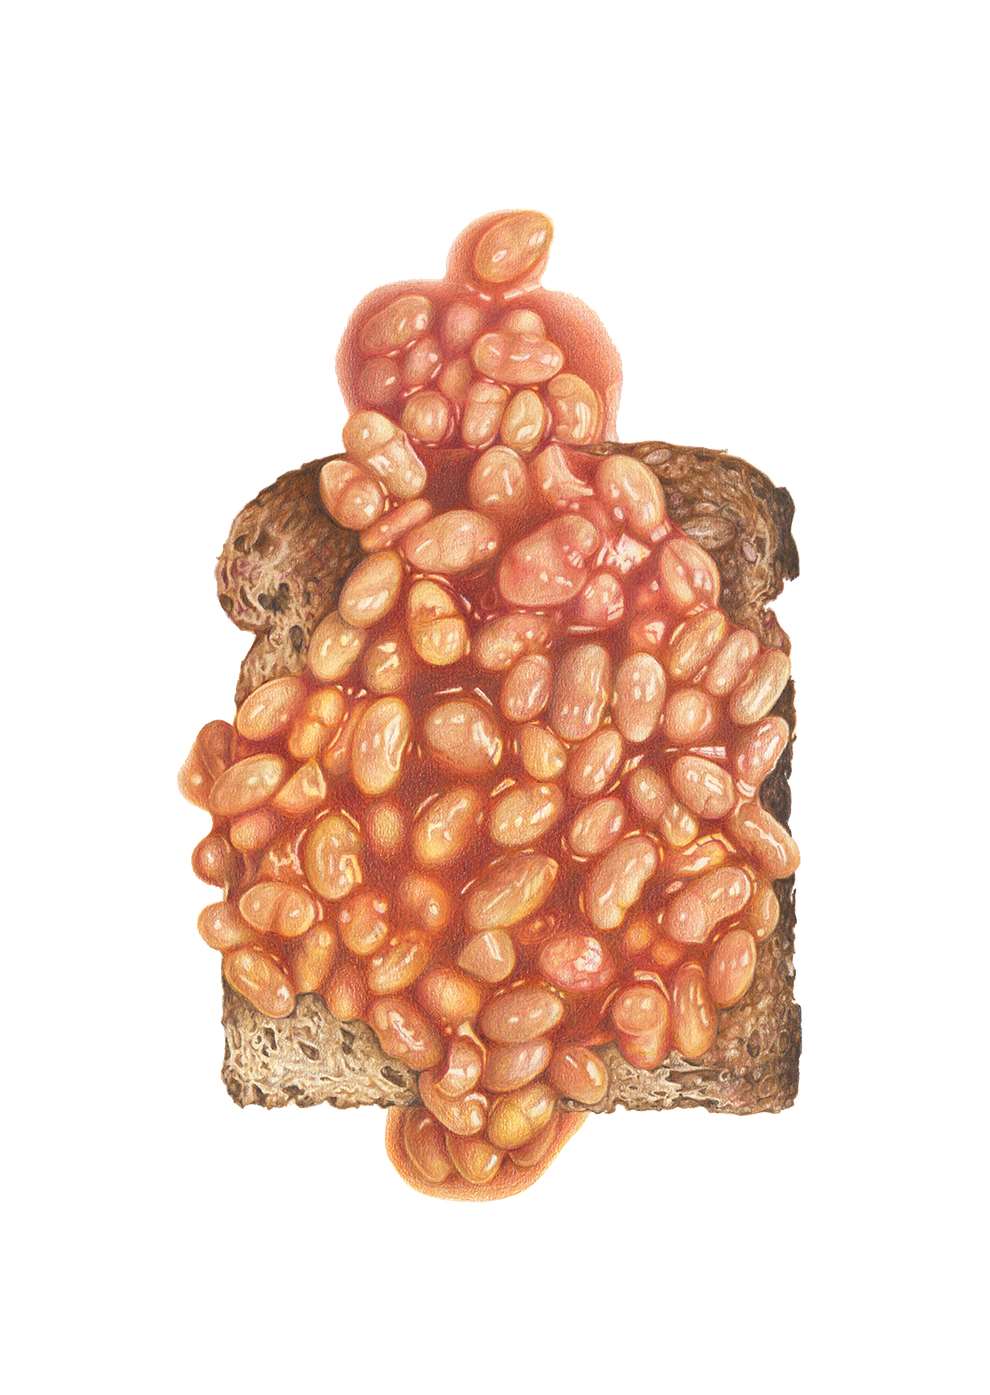 Pencil on Paper, Illustration of a beans of toast using a pencil for shading, gradient and texture.